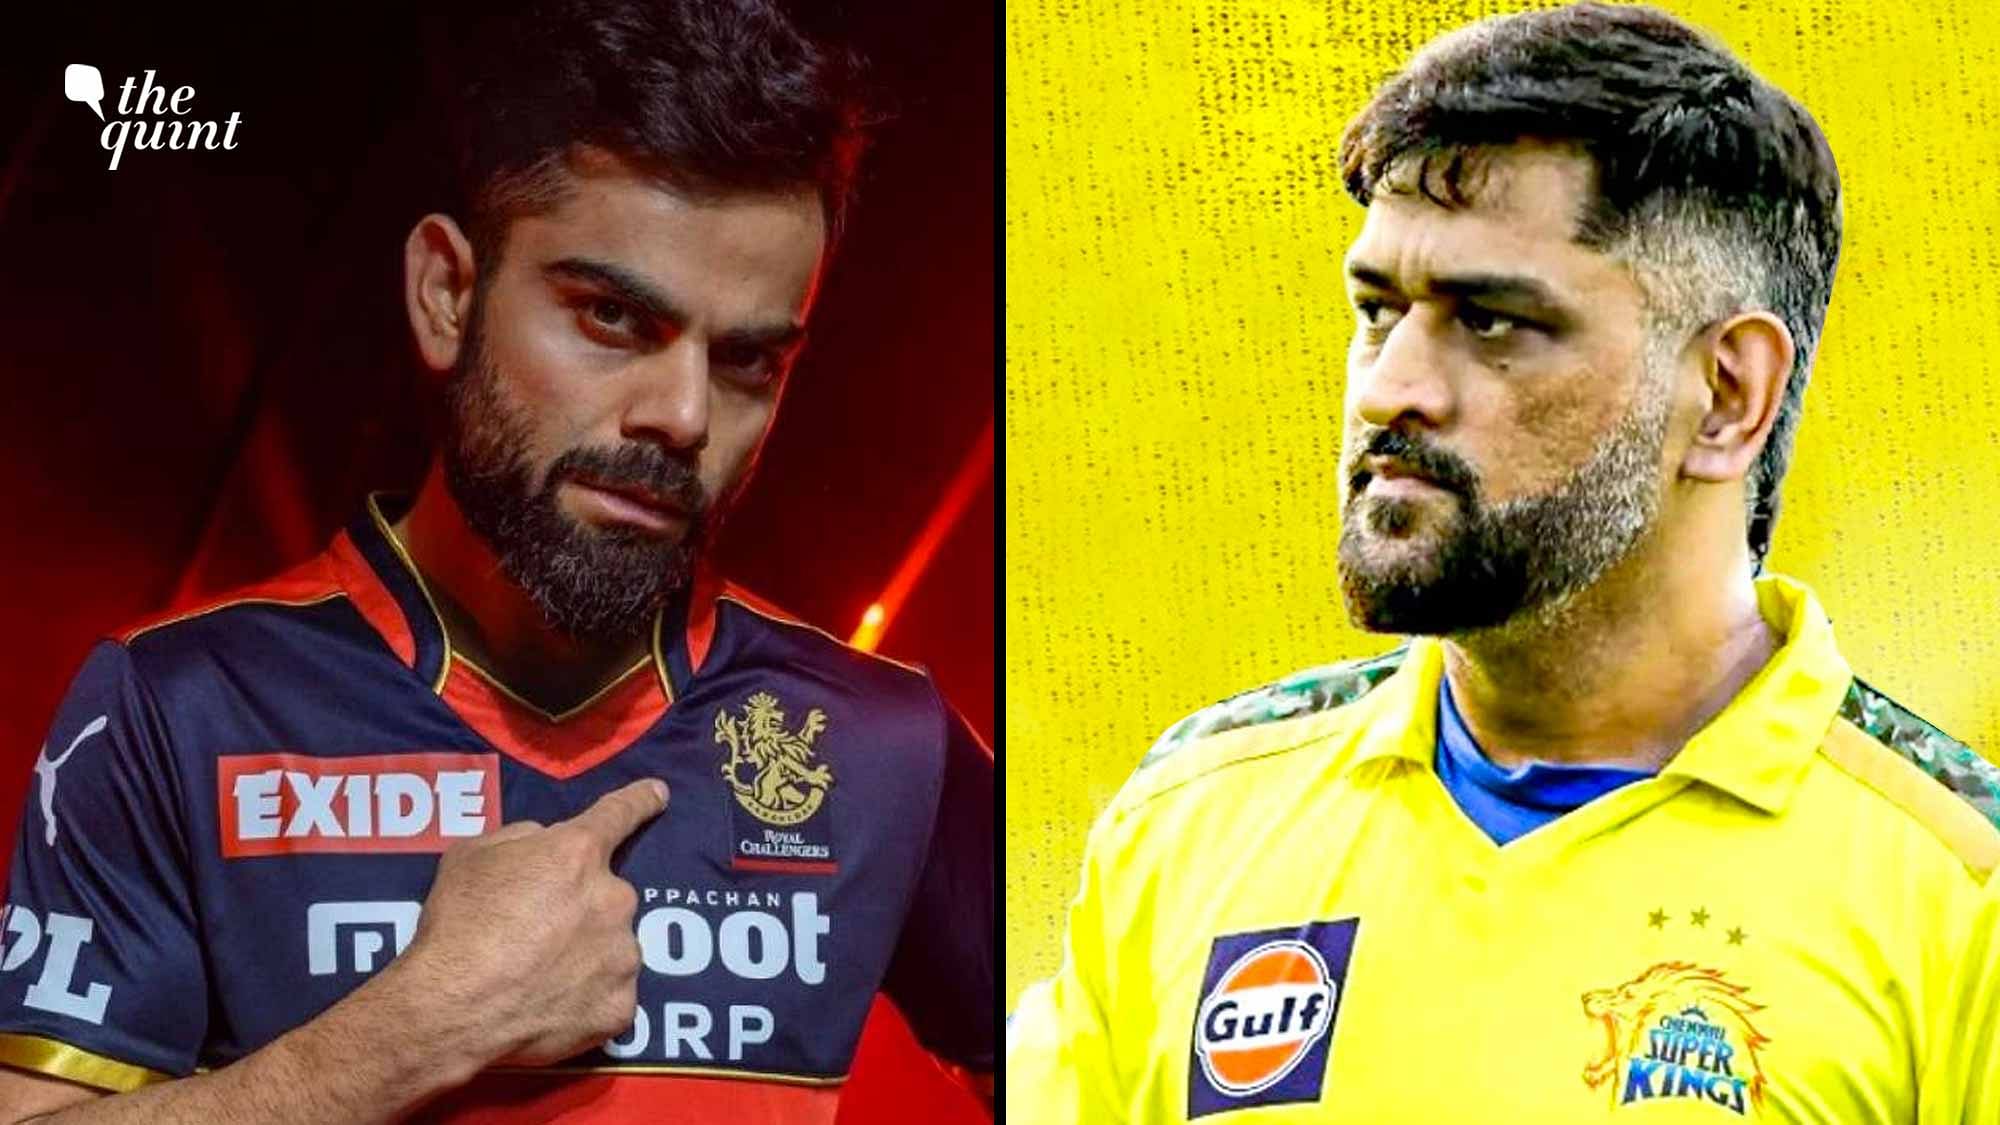 IPL 2023 Royal Challengers Bangalore (RCB) vs Chennai Super Kings (CSK) Match 24 Live Streaming, Telecast, Date, Time, Venue, and Other Details